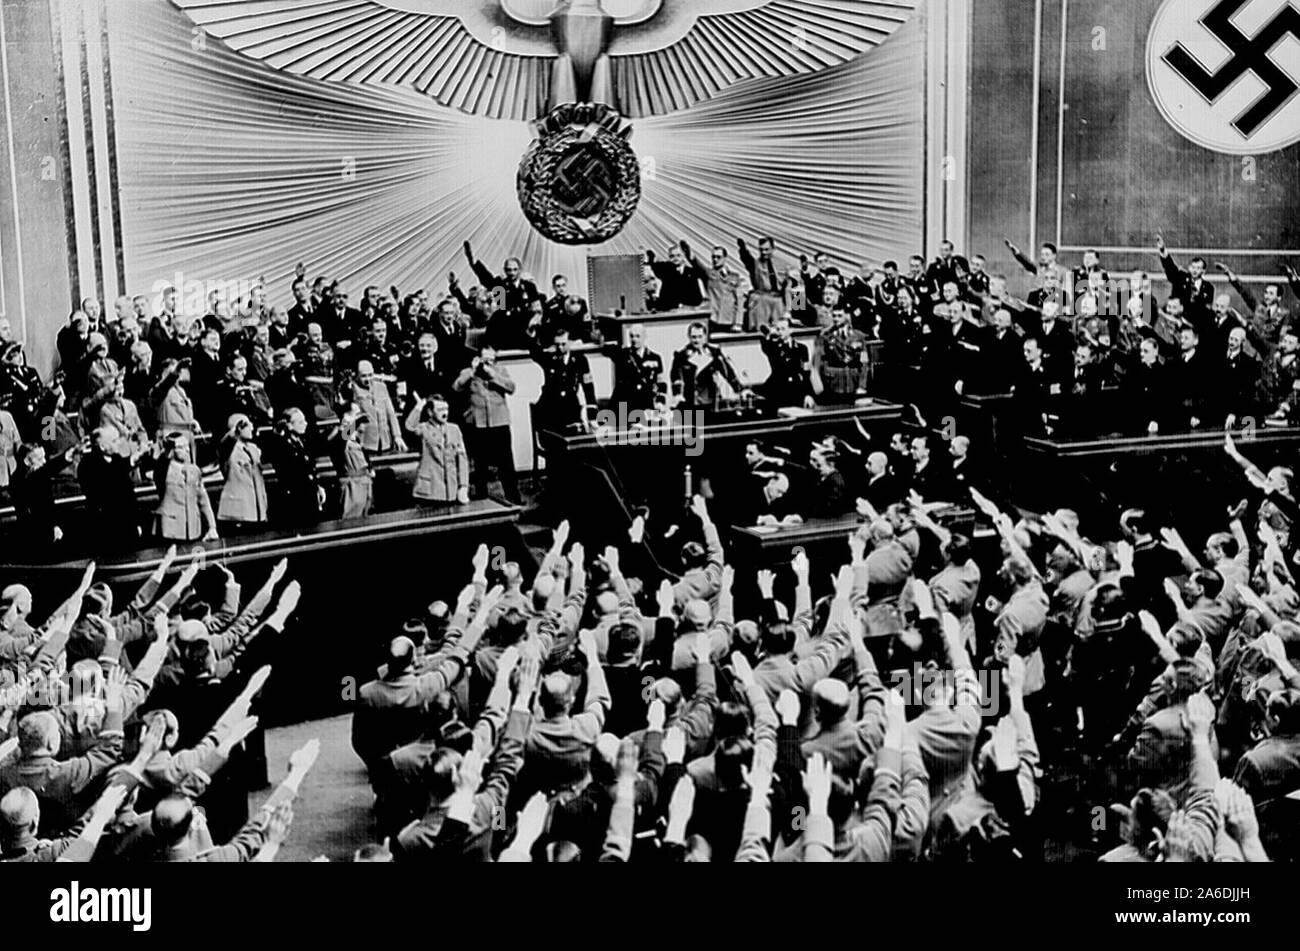 Hitler accepts the ovation of the Reichstag after announcing the `peaceful' acquisition of Austria. It set the stage to annex the Czechoslovakian Sudetenland, largely inhabited by a German- speaking population. Berlin, March 1938 Stock Photo